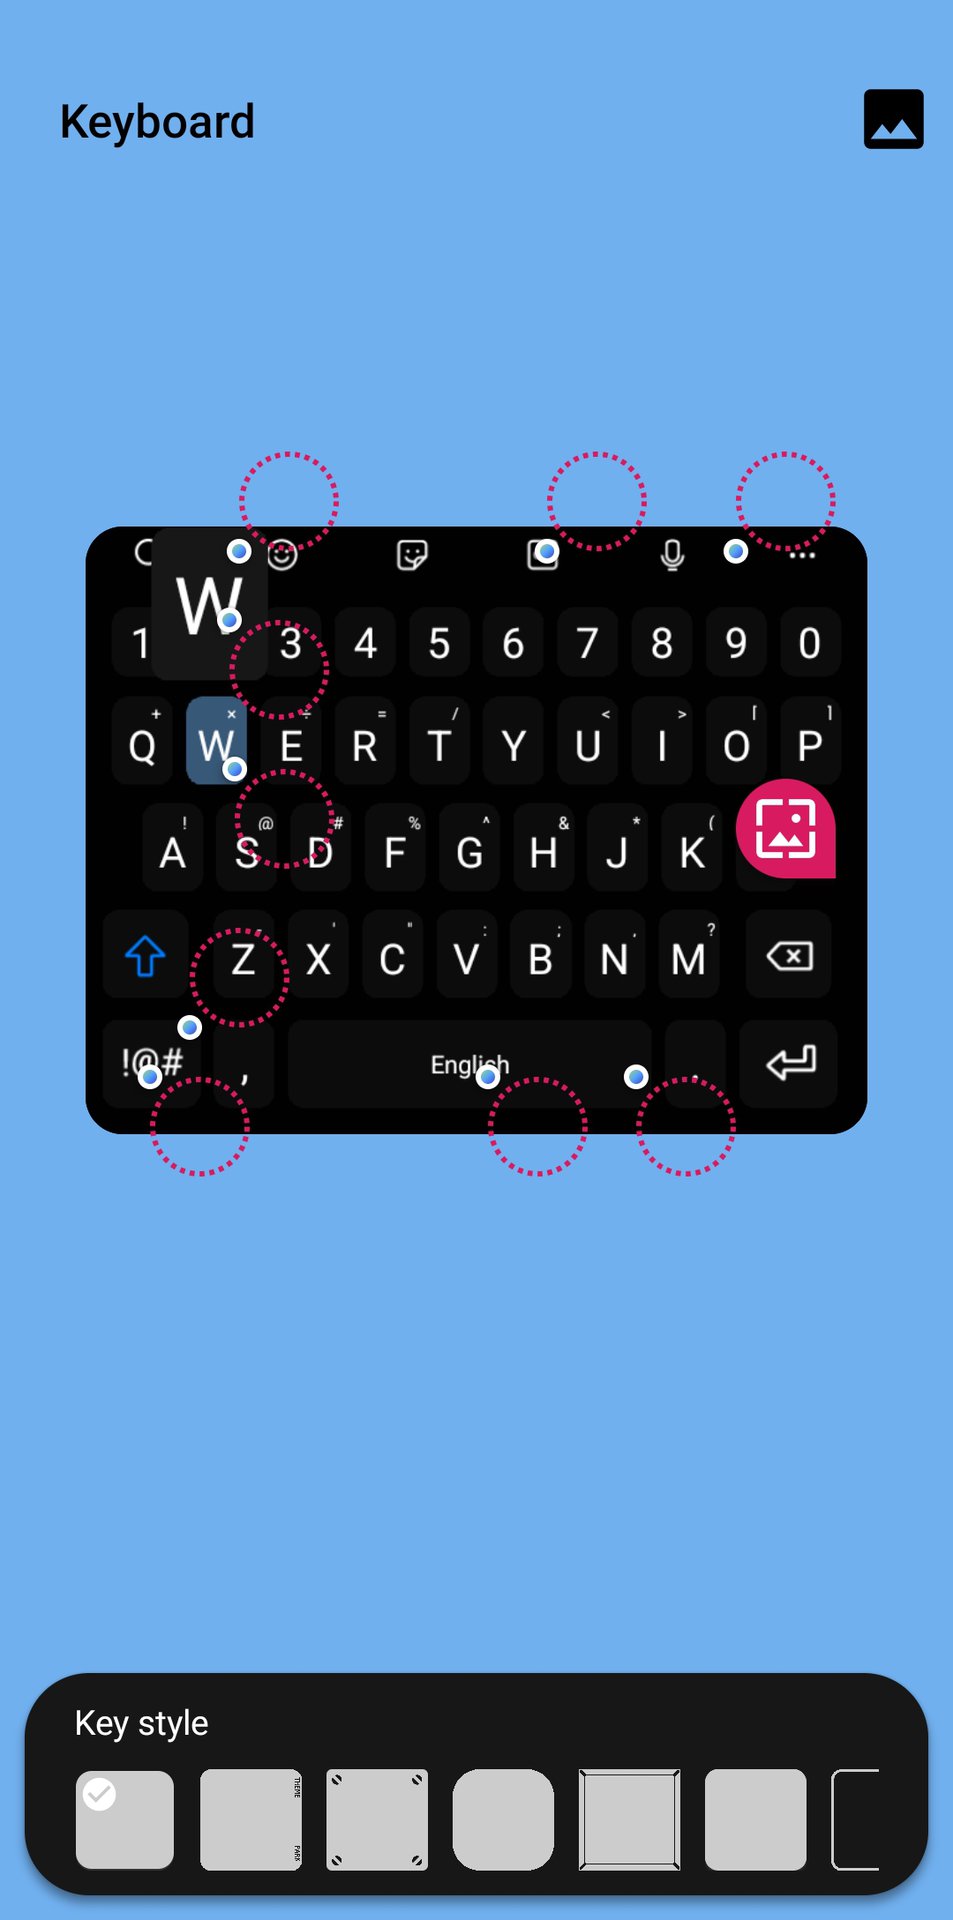 Setting keyboard colors in the Samsung Theme Park app.